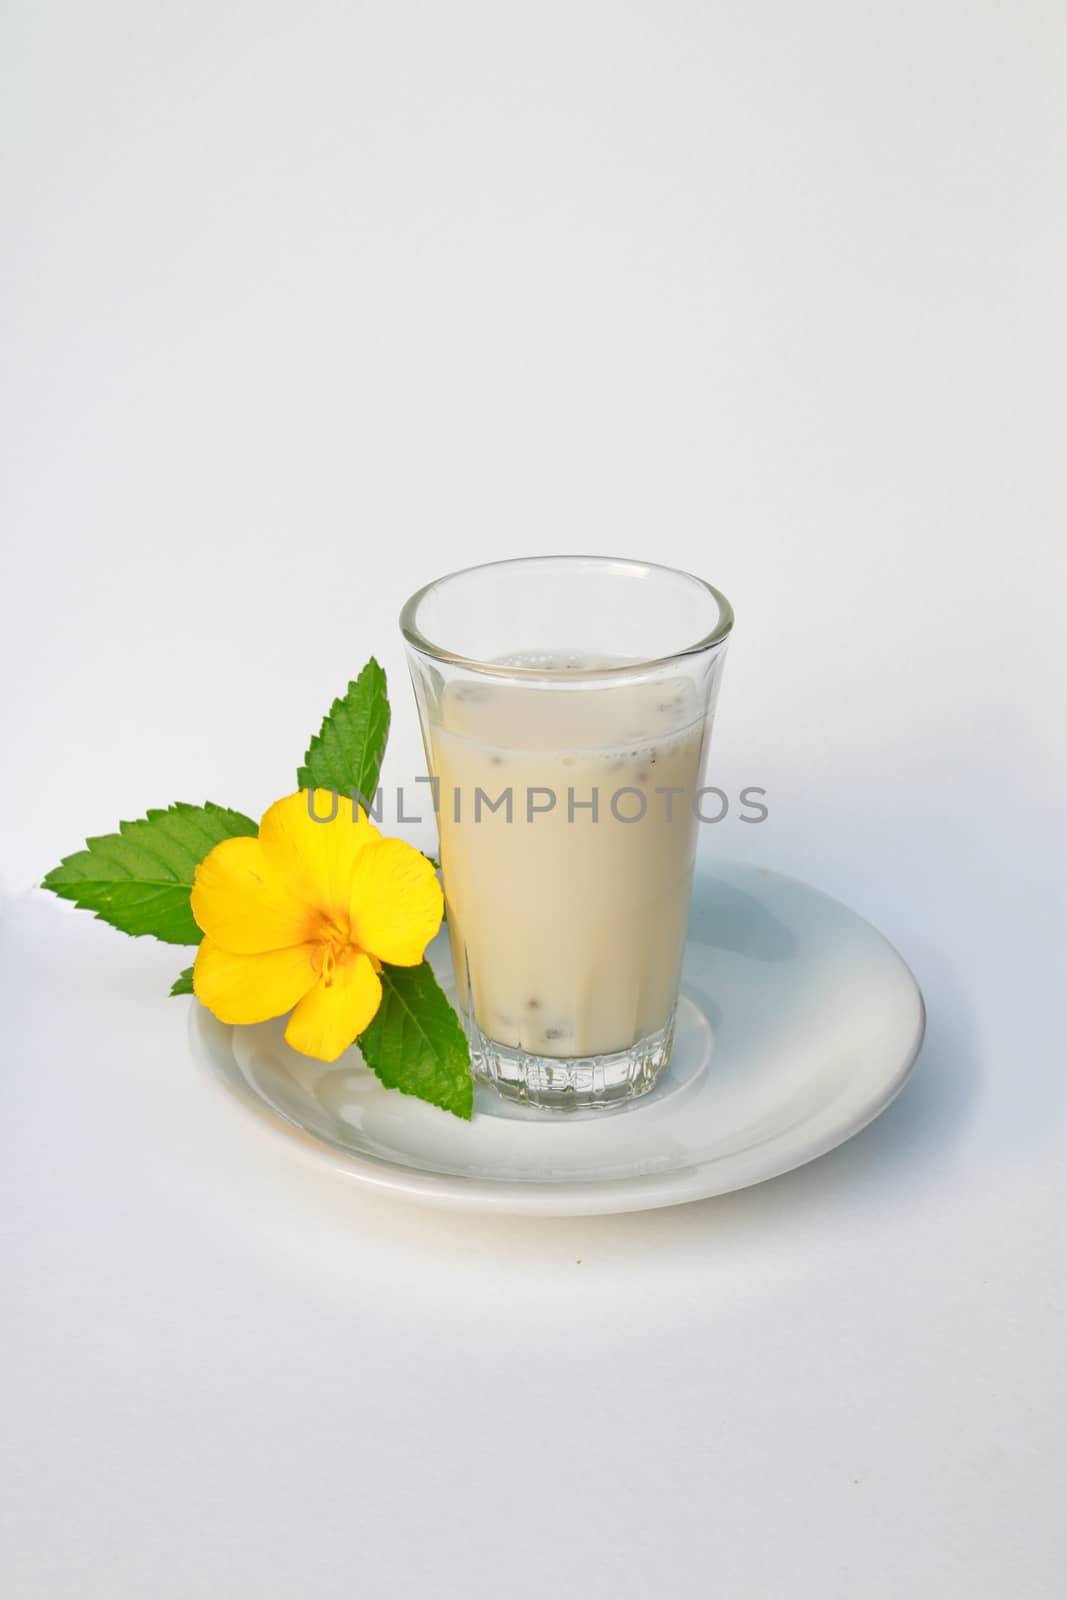 The glass of hot soy milk with lemon basil.